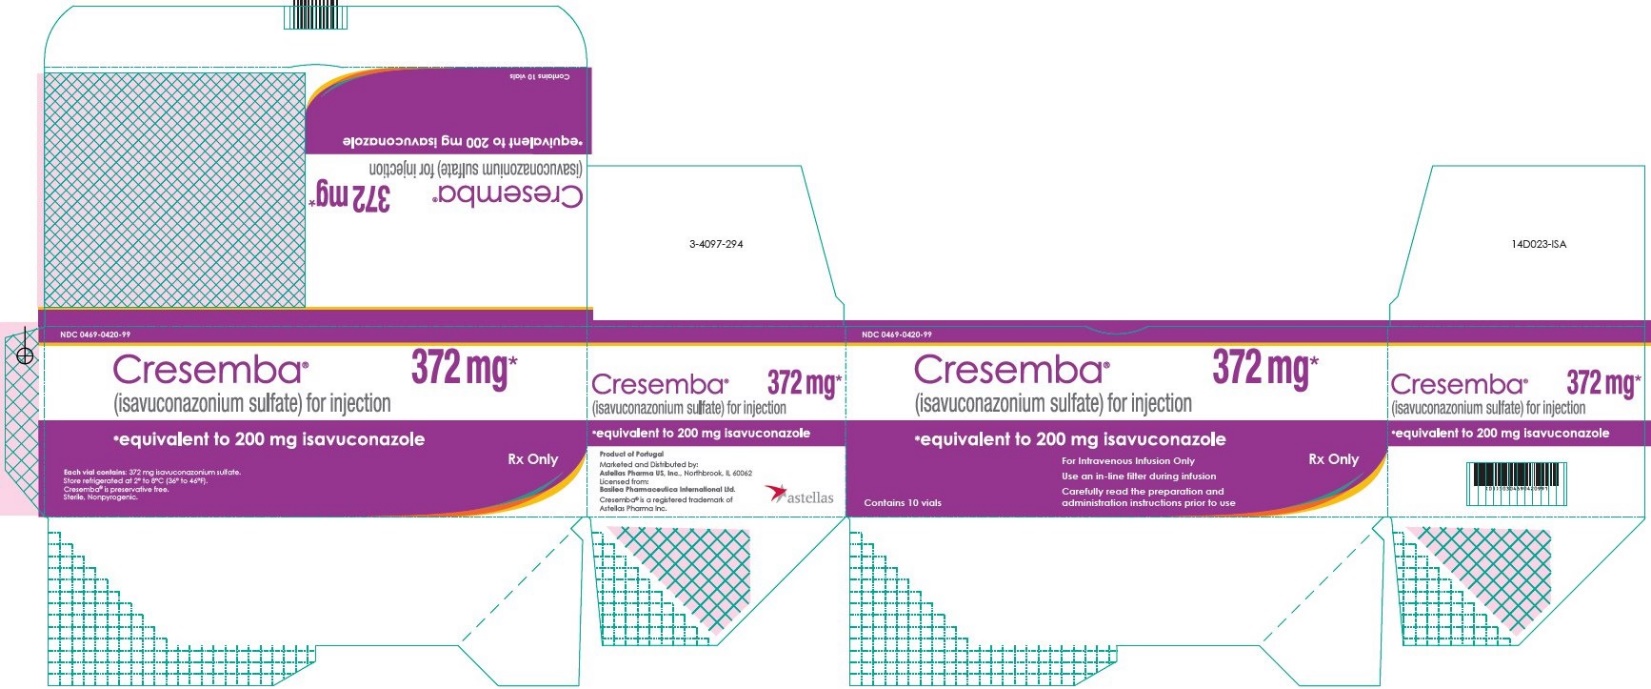 Cresemba (isavuconazonium sulfate) for injection 372 mg vial carton label